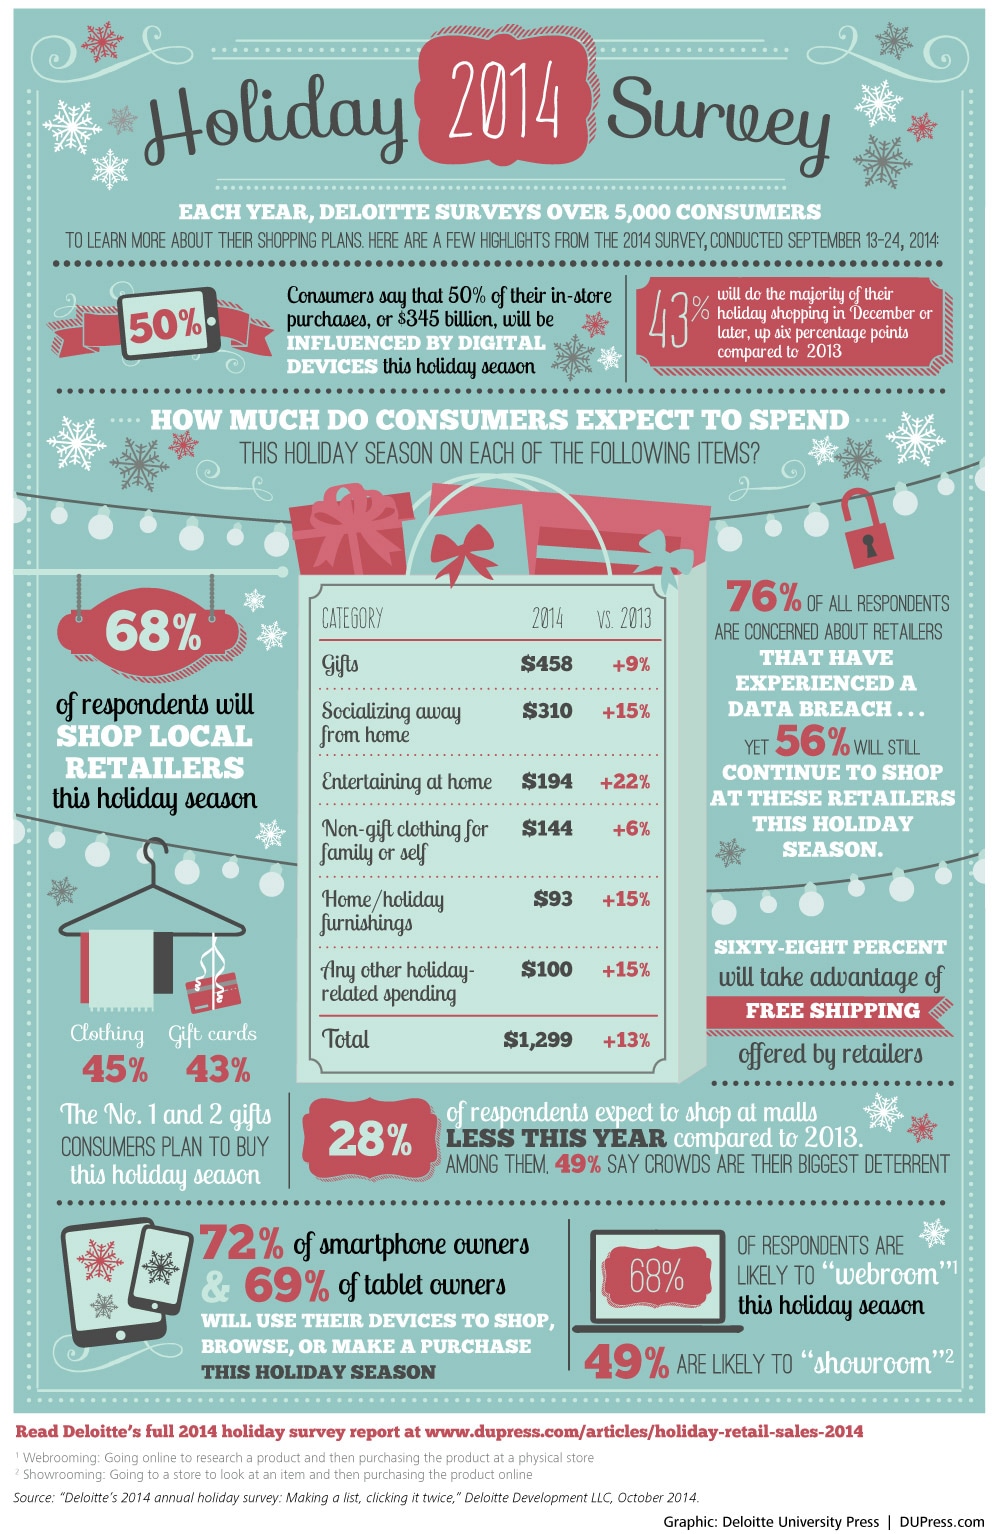 Deloitte's 2014 annual holiday survey